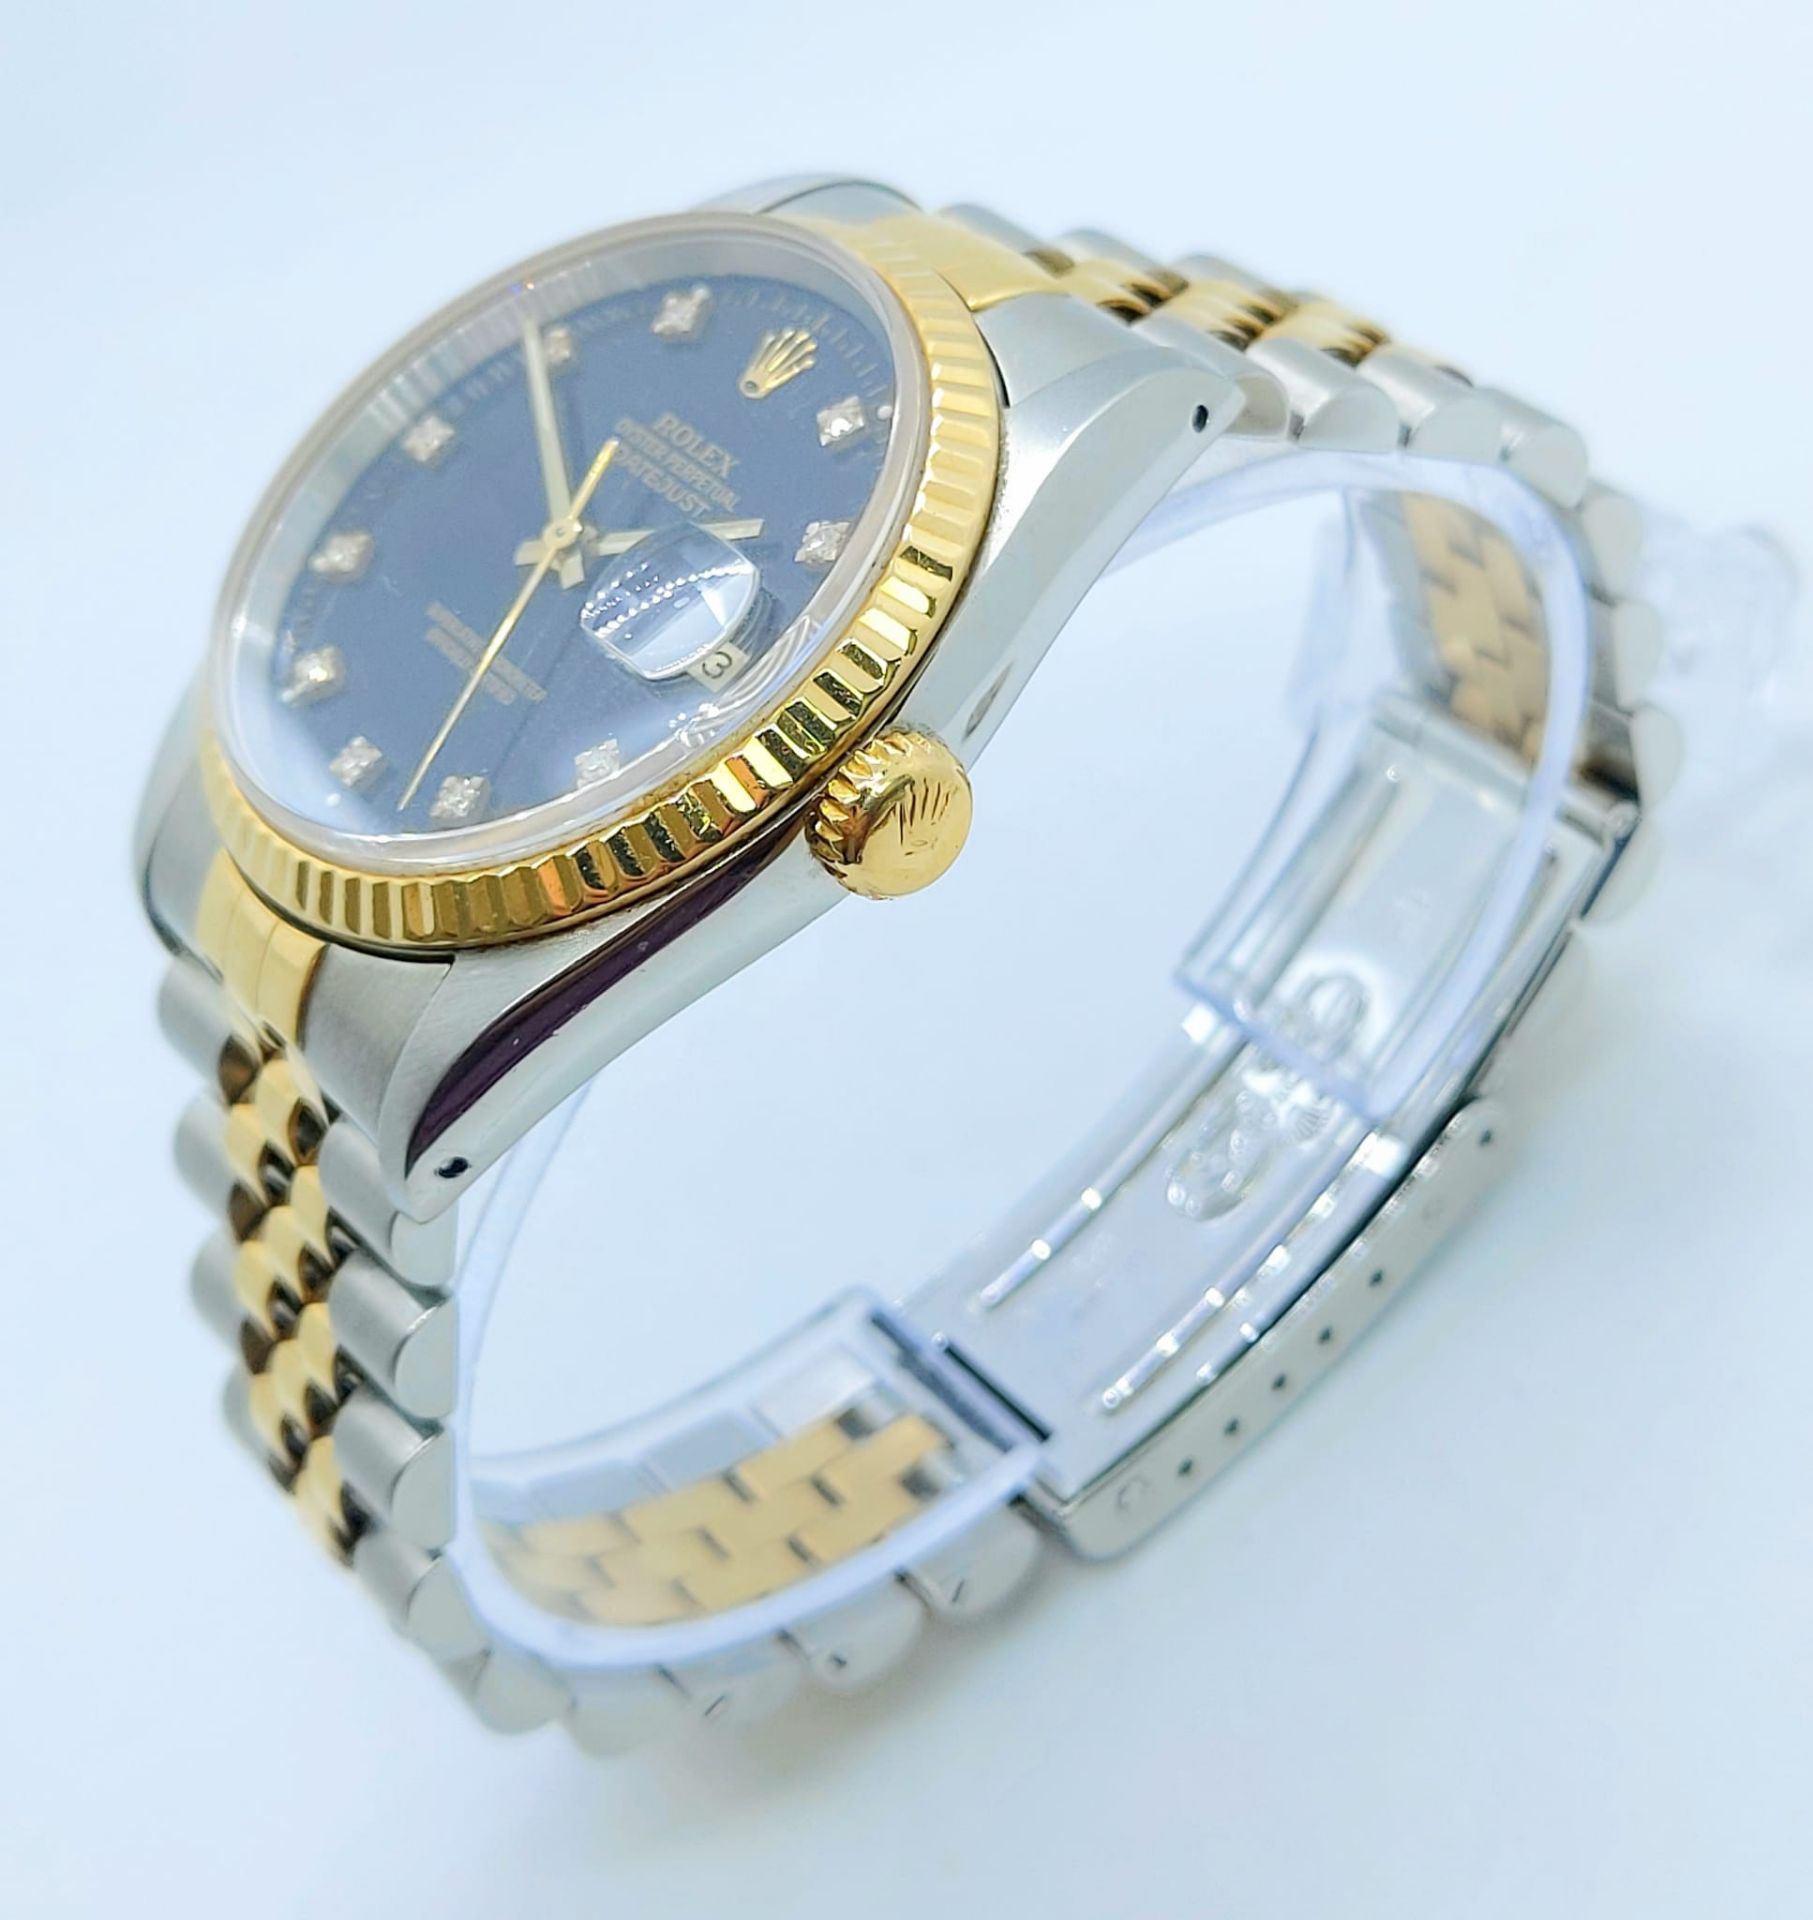 A Bi-Metal Rolex Oyster Perpetual Datejust Gents Diamond Watch. Bi-metal strap and case - 36mm. - Image 5 of 7